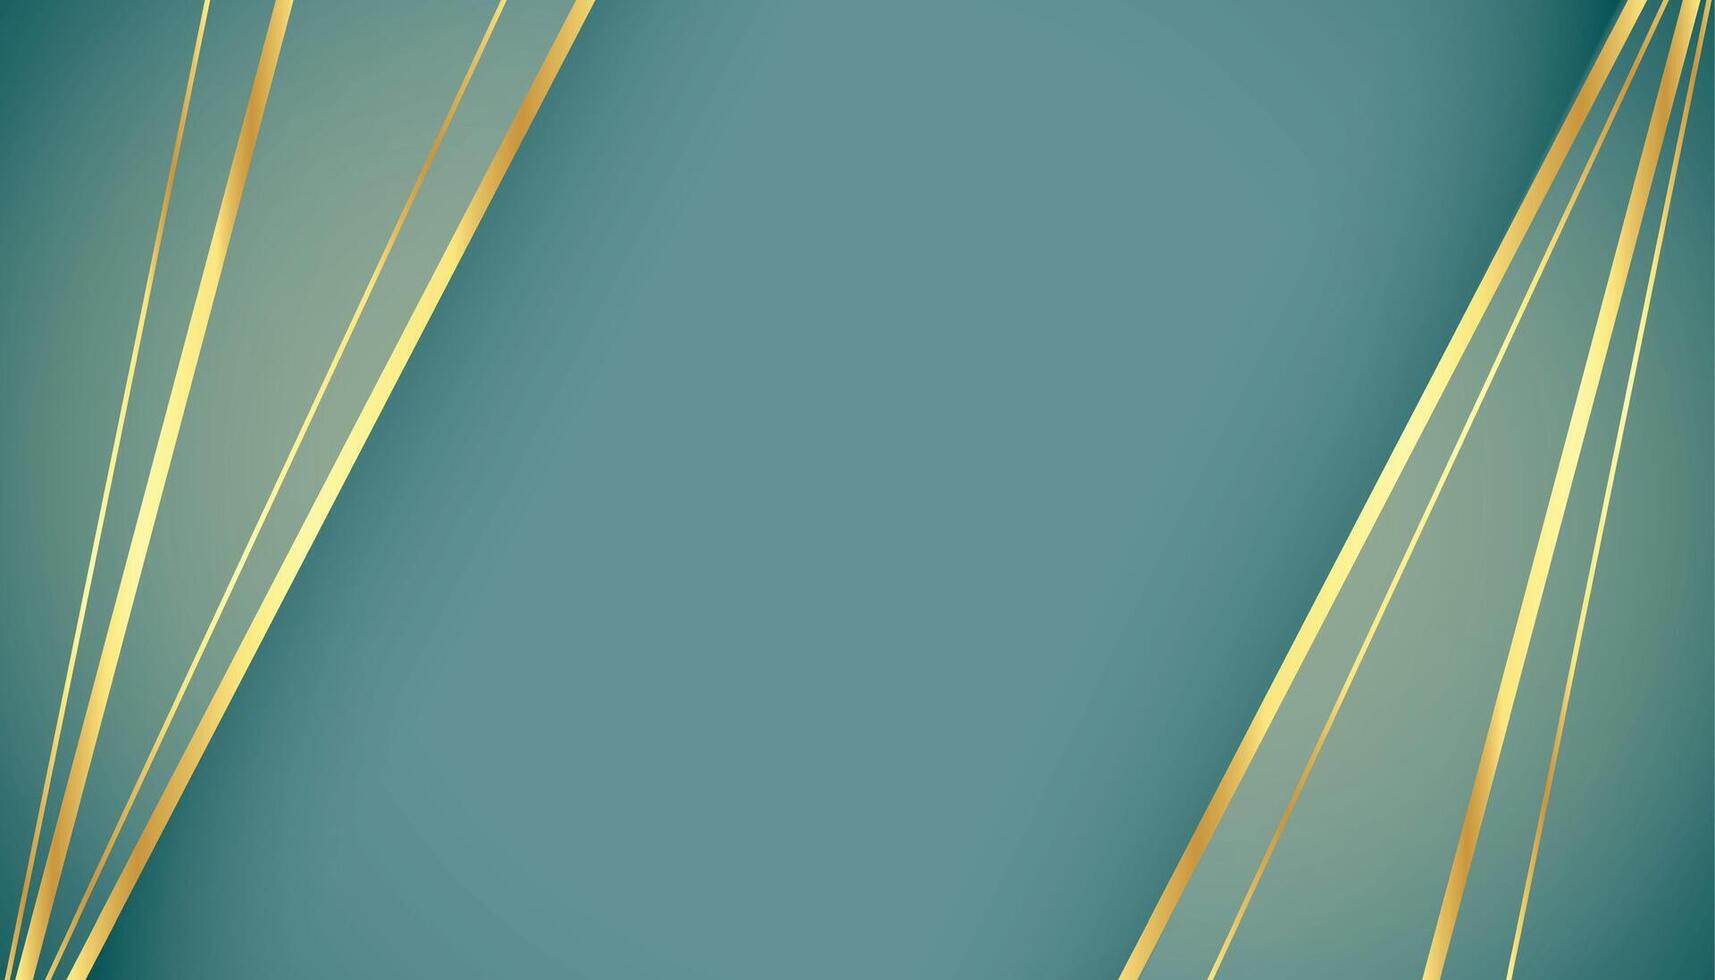 royal background with golden lines design vector